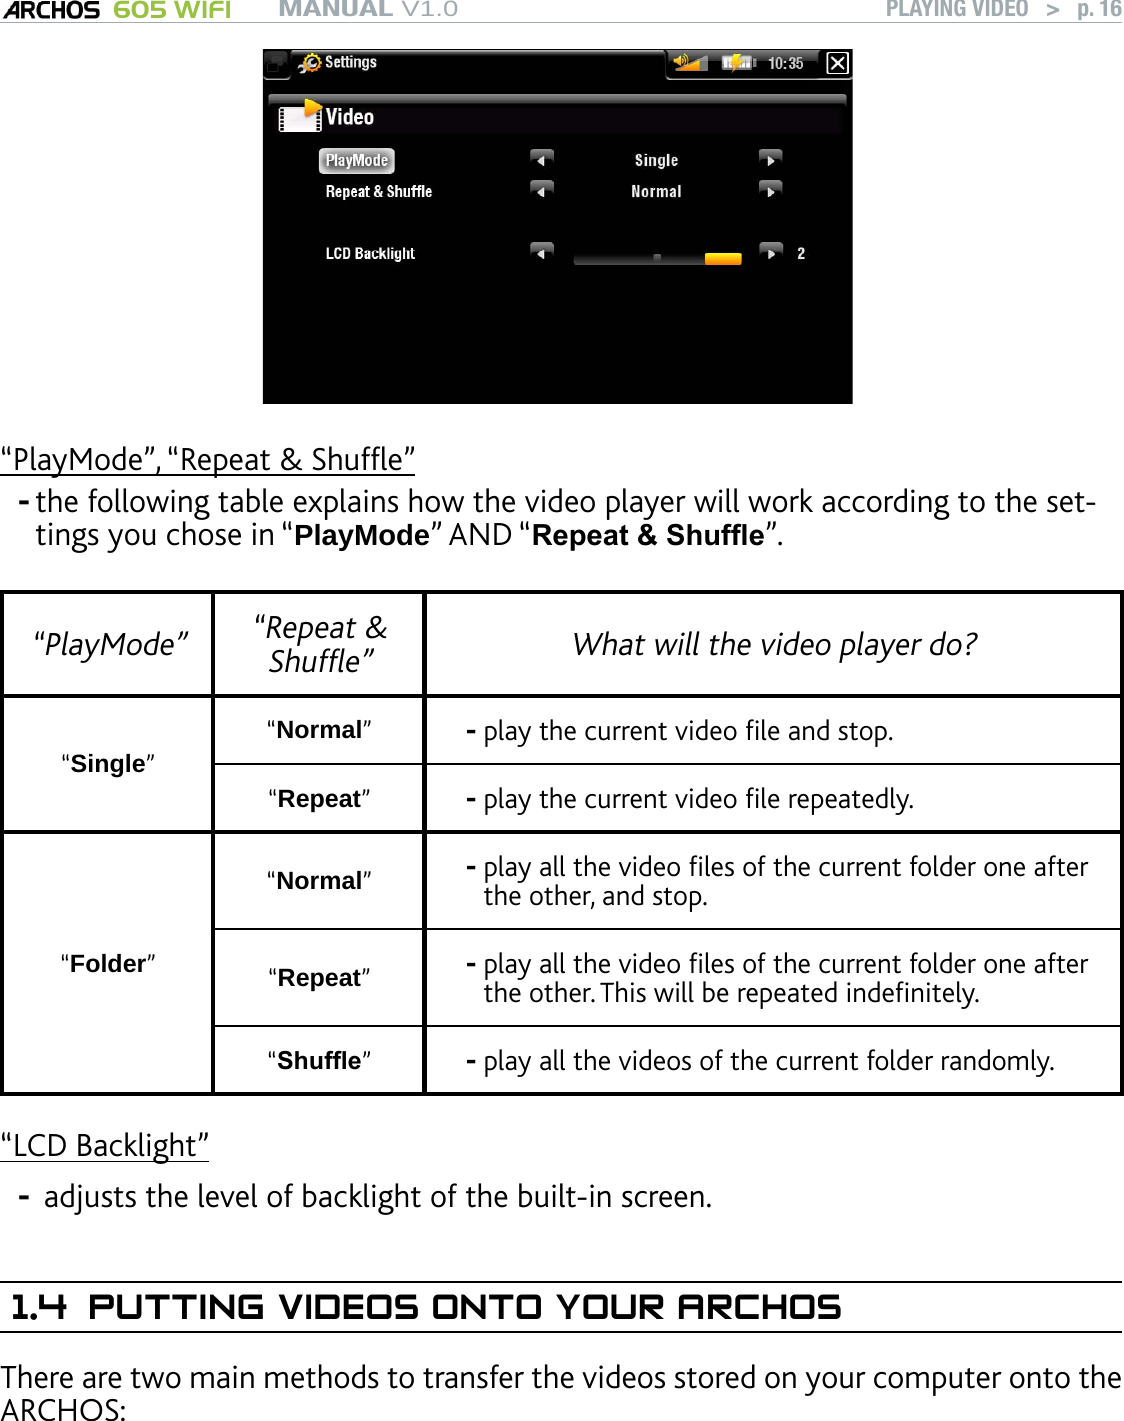 MANUAL V1.0 605 WIFI PLAYING VIDEO   &gt;   p. 16“PlayMode”, “Repeat &amp; Shufe”the following table explains how the video player will work according to the set-tings you chose in “PlayMode” AND “Repeat &amp; Shufe”. “PlayMode”  “Repeat &amp; Shufe” What will the video player do?“Single”“Normal”play the current video le and stop.-“Repeat”play the current video le repeatedly.-“Folder”“Normal”play all the video les of the current folder one after the other, and stop.-“Repeat”play all the video les of the current folder one after the other. This will be repeated indenitely.-“Shufe”  play all the videos of the current folder randomly.-“LCD Backlight” adjusts the level of backlight of the built-in screen. 1.4  PUTTING VIDEOS ONTO YOUR ARCHOSThere are two main methods to transfer the videos stored on your computer onto the ARCHOS:--